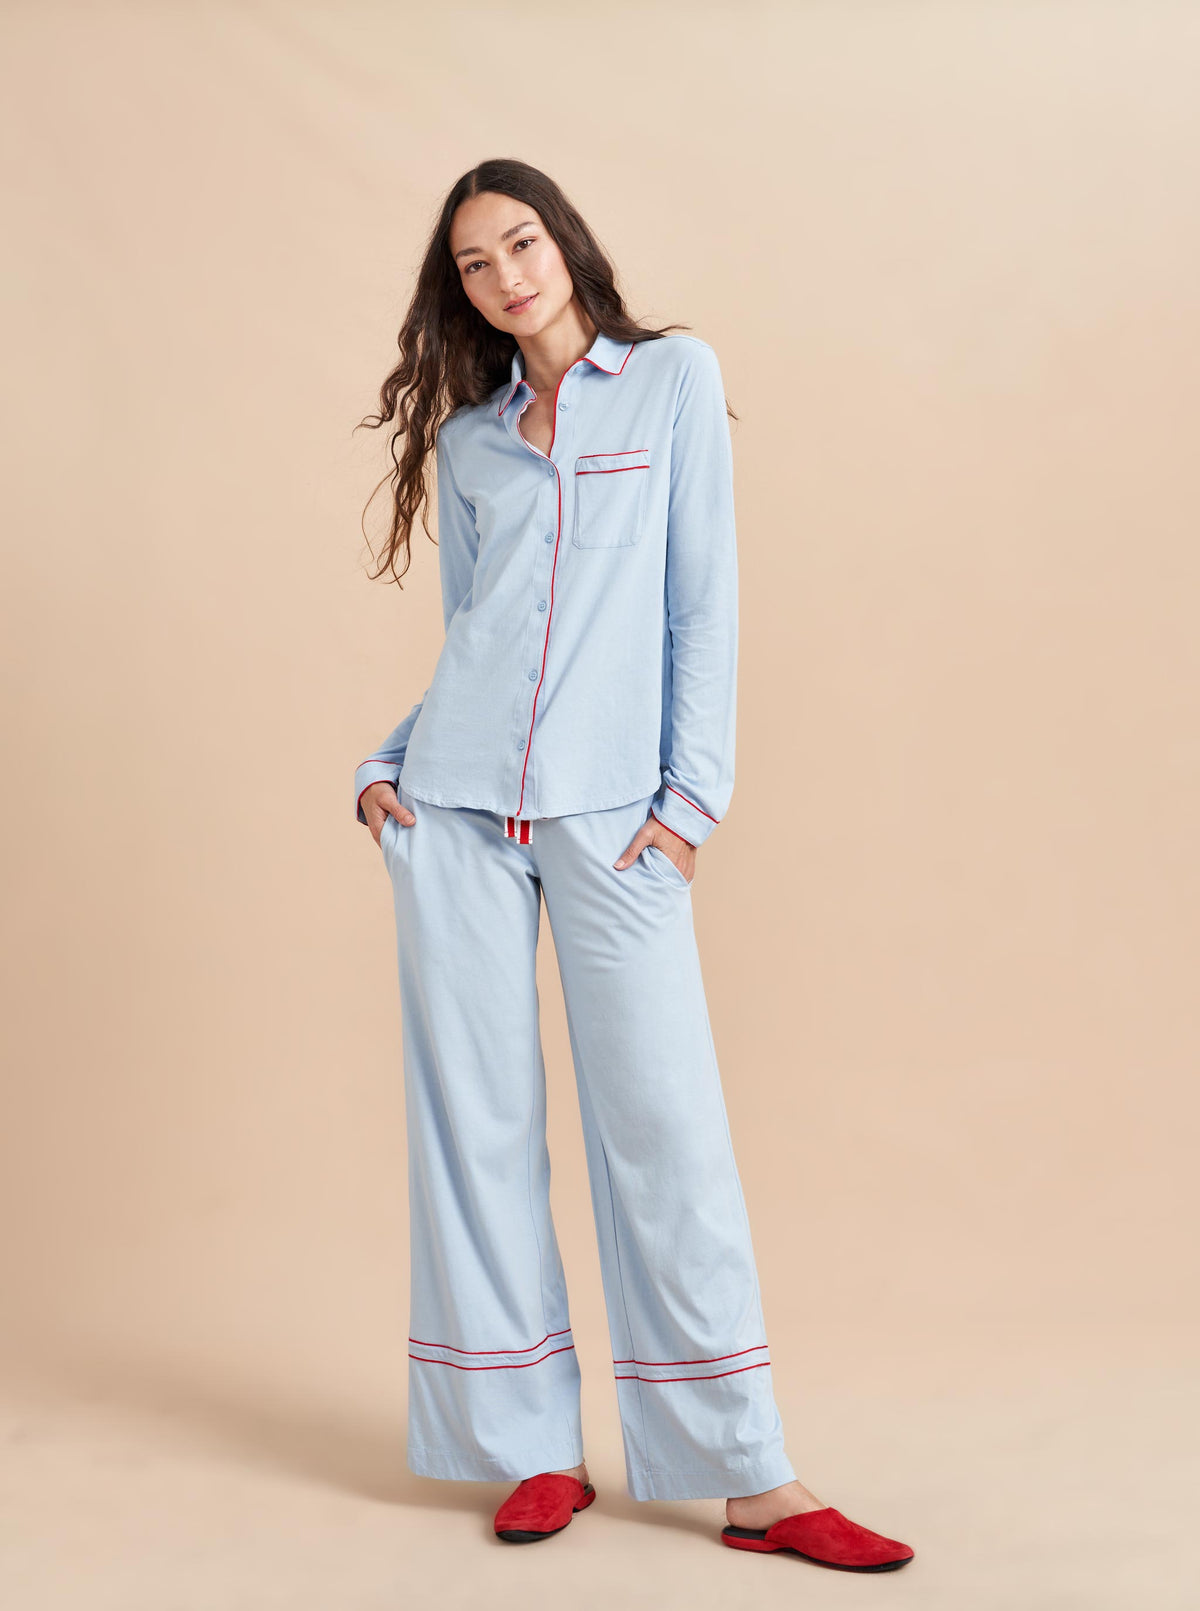 Pajama party ready. Our PJs are cut from our super soft t-shirt fabric for the ultimate in comfort and style when you need a little hygge. Pale blue cotton framed with contrasting red piping, our PJ set has a relaxed-fit top and elasticated drawstring wide-leg pants.